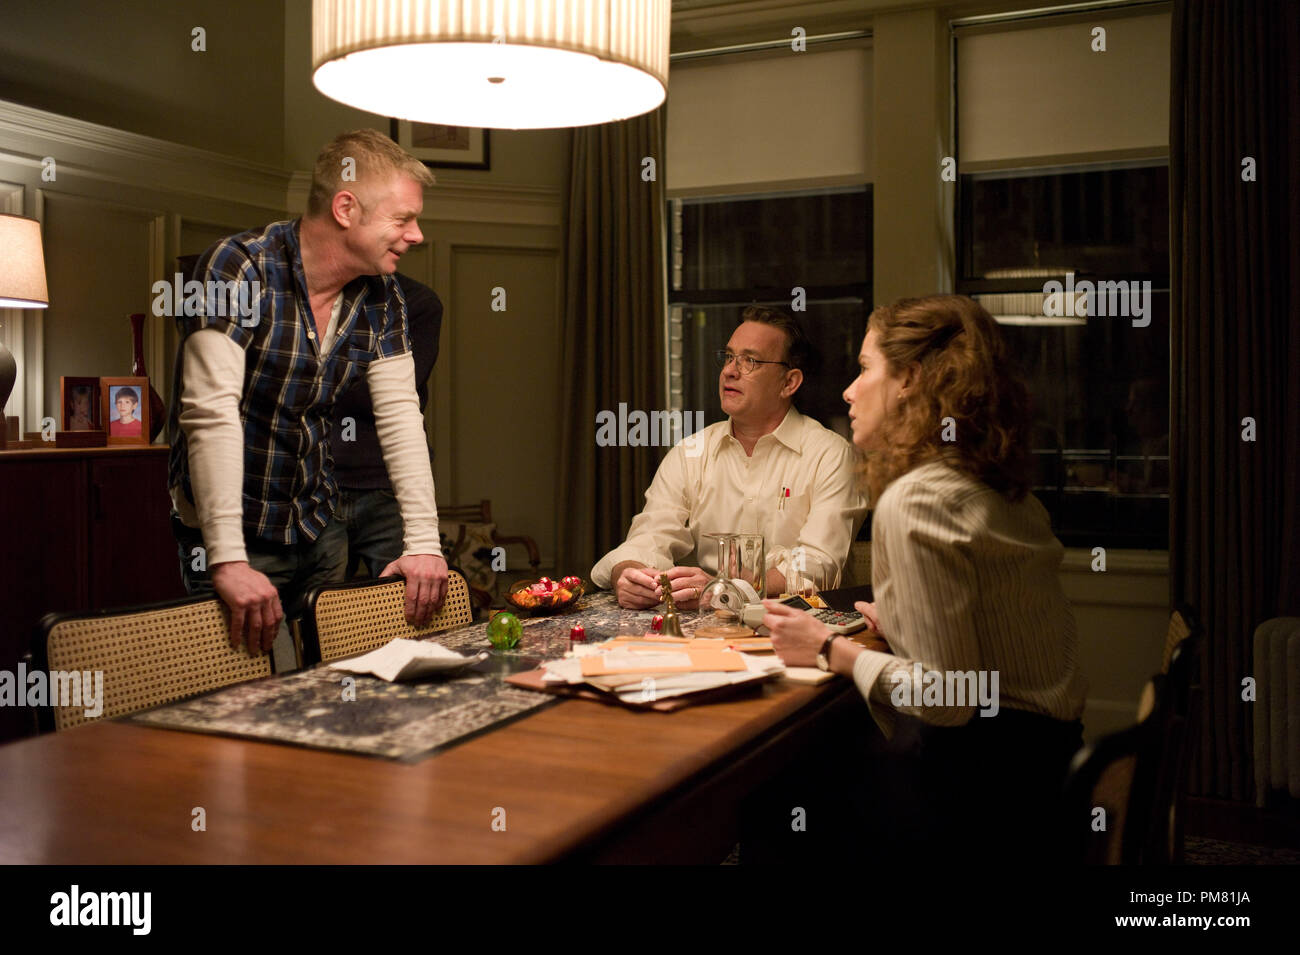 (L-r) Director STEPHEN DALDRY, TOM HANKS and SANDRA BULLOCK during the filming of Warner Bros. Pictures? drama ?EXTREMELY LOUD & INCREDIBLY CLOSE,? a Warner Bros. Pictures release. Stock Photo